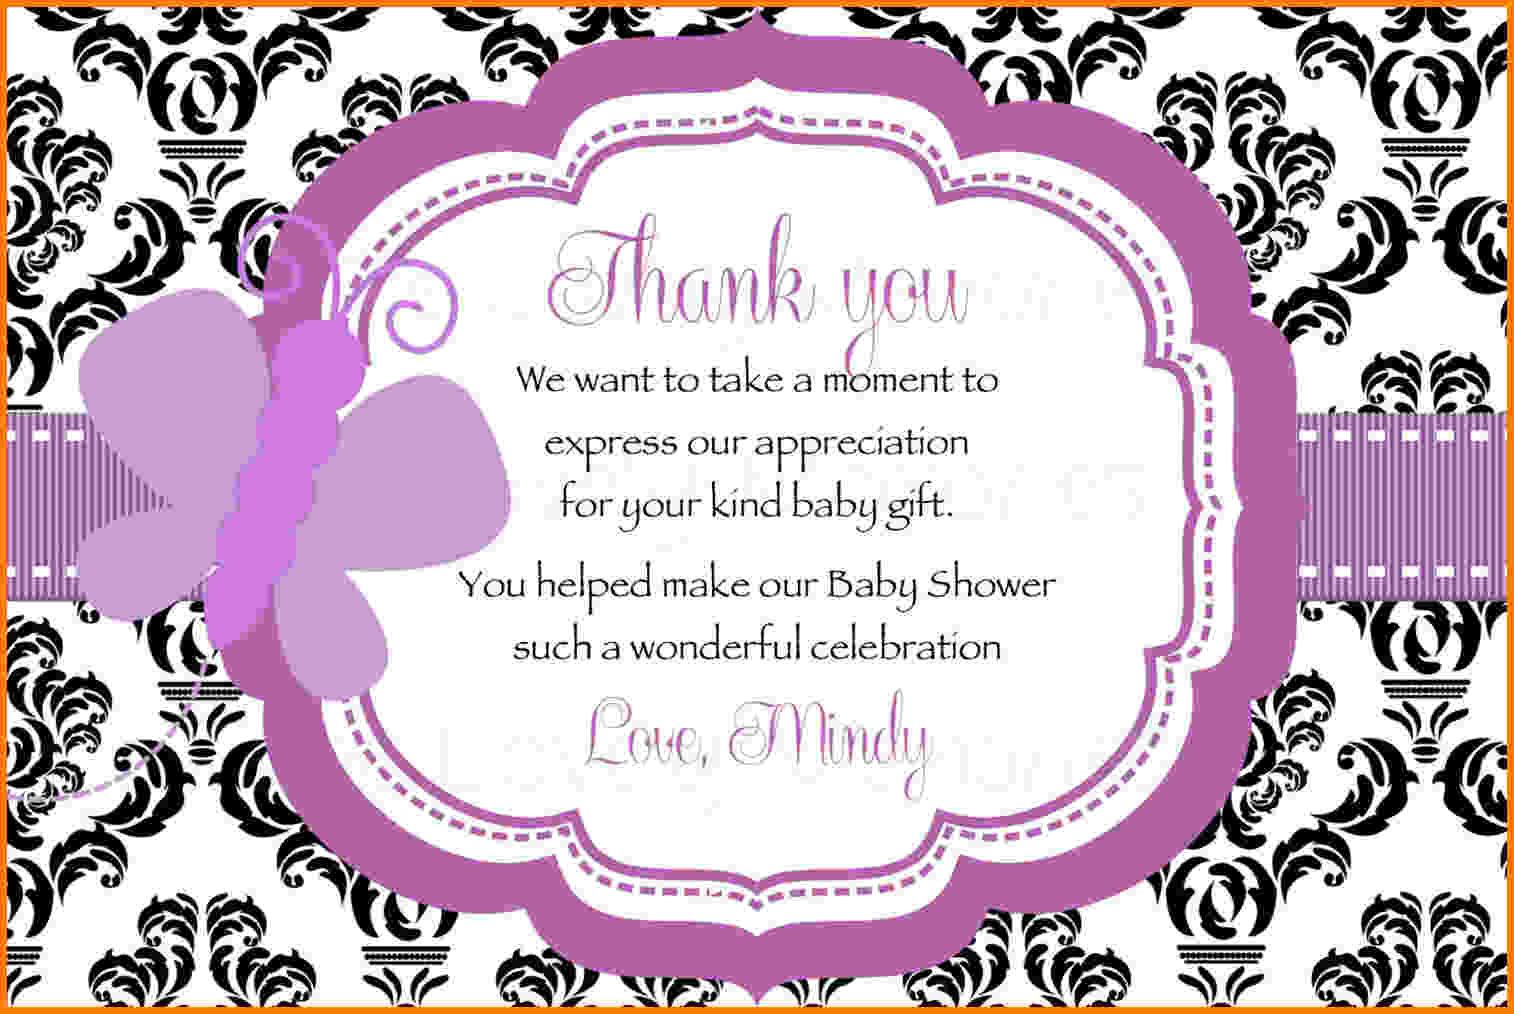 Full Size of Baby Shower:72+ Rousing Baby Shower Thank You Cards Picture Ideas Baby Shower Thank You Cards Baby Shower Ideas A Baby Shower Baby Shower Food Boy Baby Shower Game Prizes Free Baby Shower Games Friendship Baby Shower Thank You Cards Anchor With Baby Shower